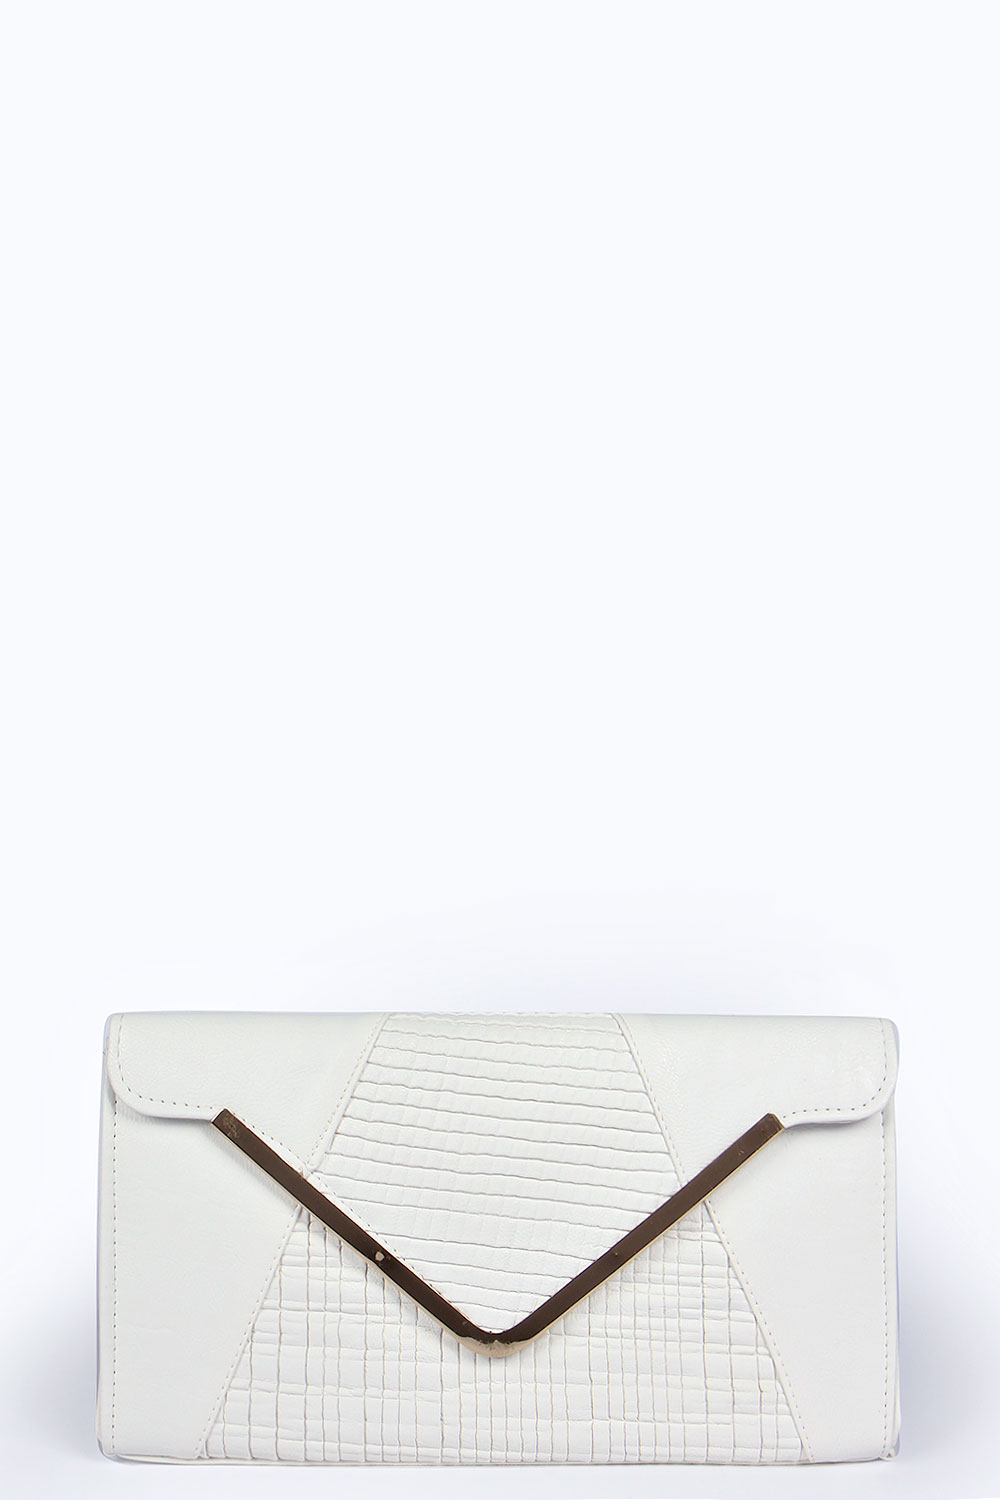 boohoo Holly Metal Trim Panelled Clutch - white